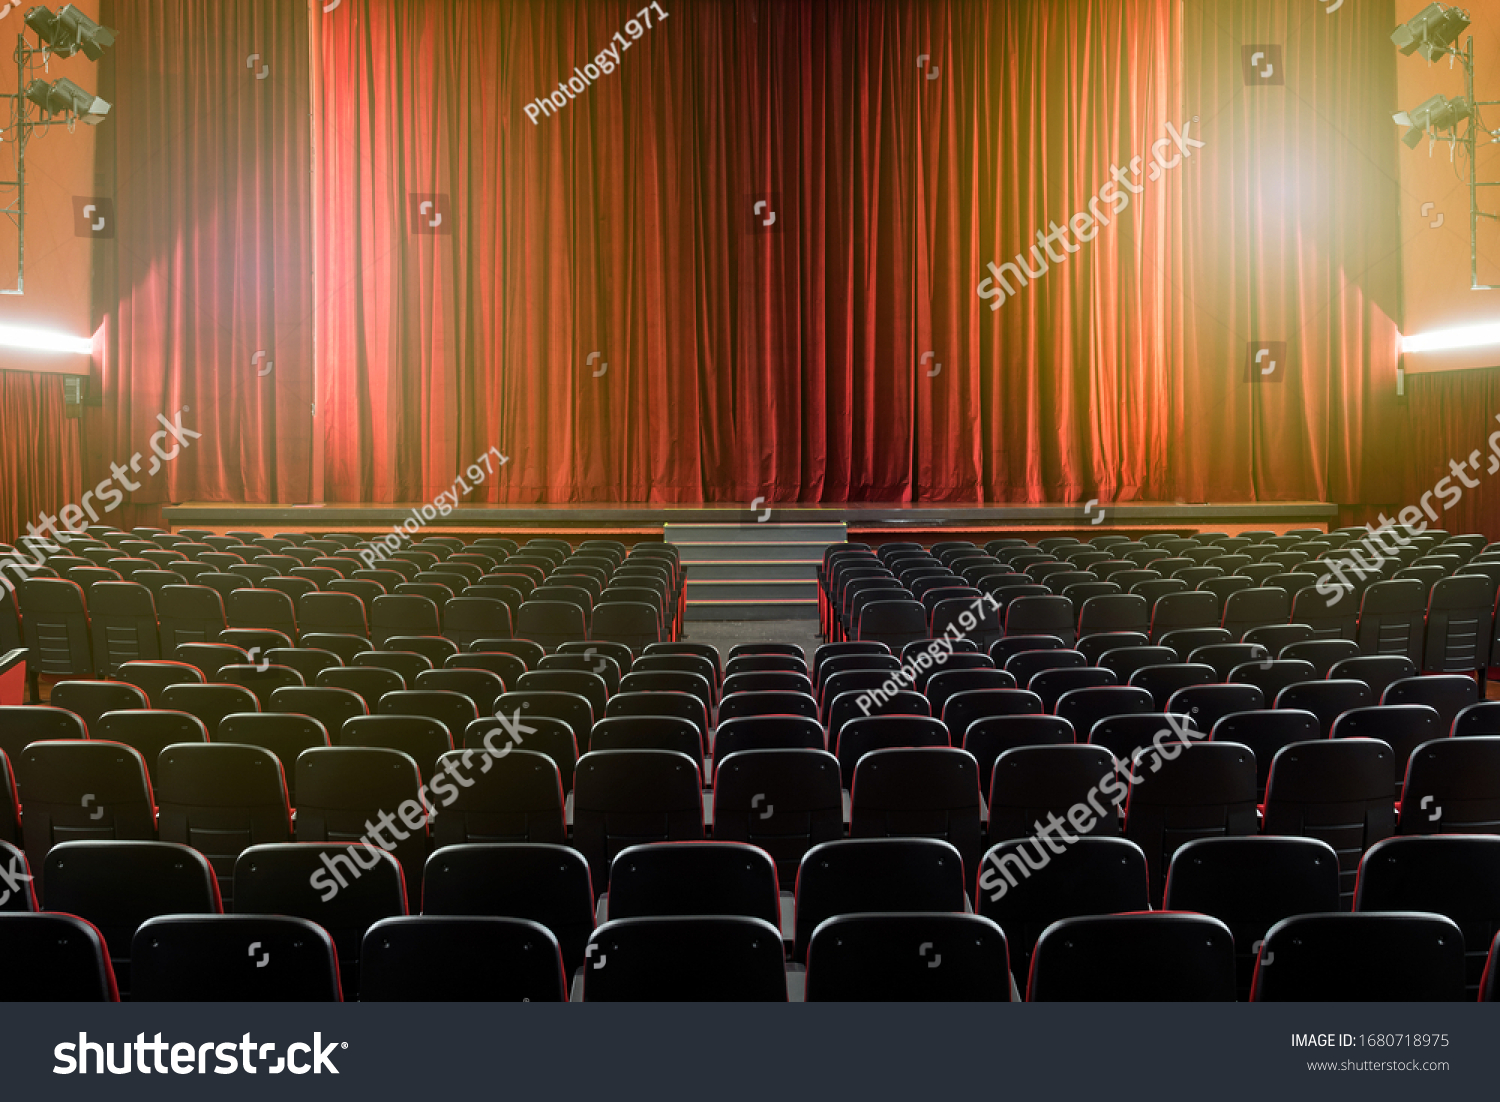 4,965 Playhouse theatre Images, Stock Photos & Vectors | Shutterstock